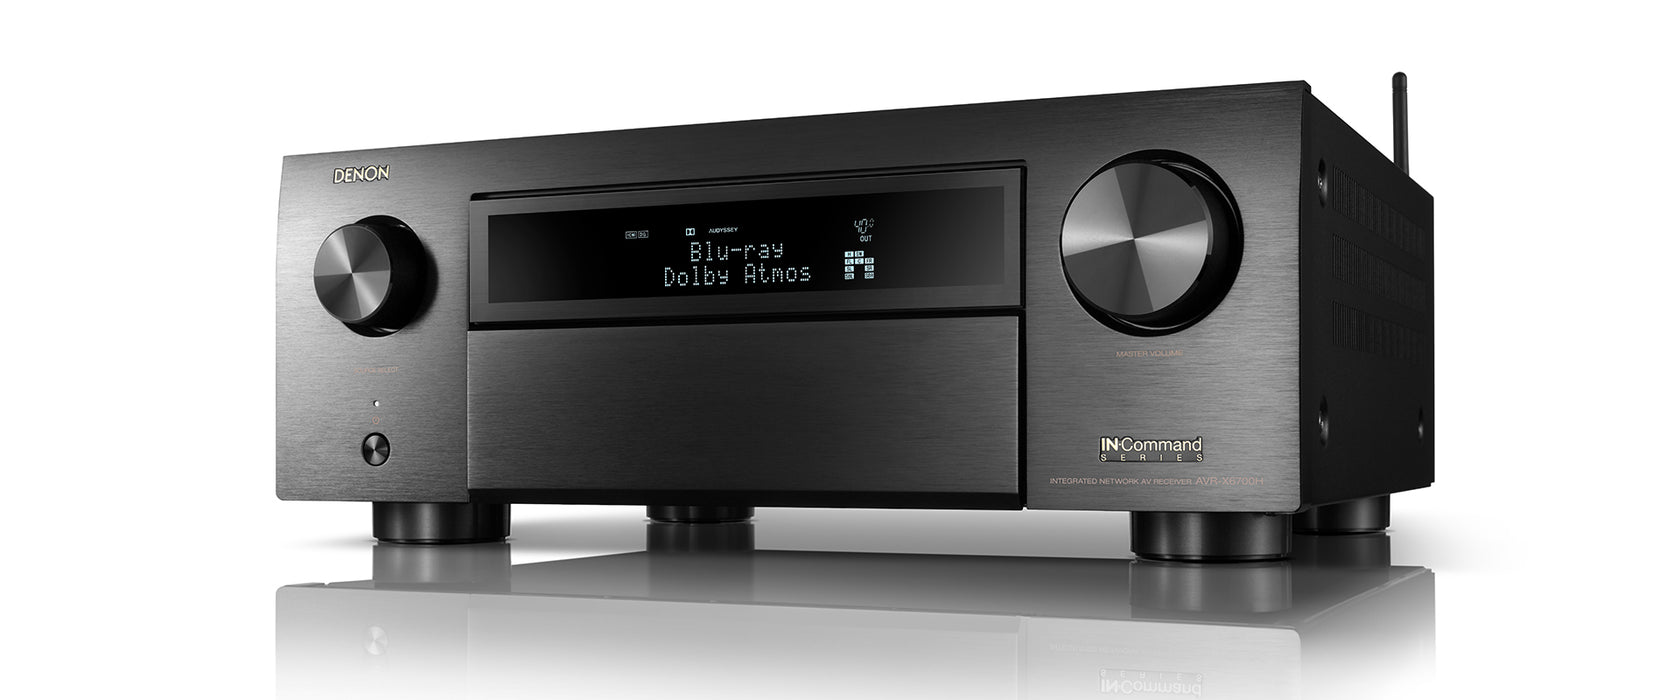 Denon AVR-X6700H 11.2 Channel 8K A/V Receiver with 3D Audio and Amazon Alexa Voice Control Open Box - Safe and Sound HQ